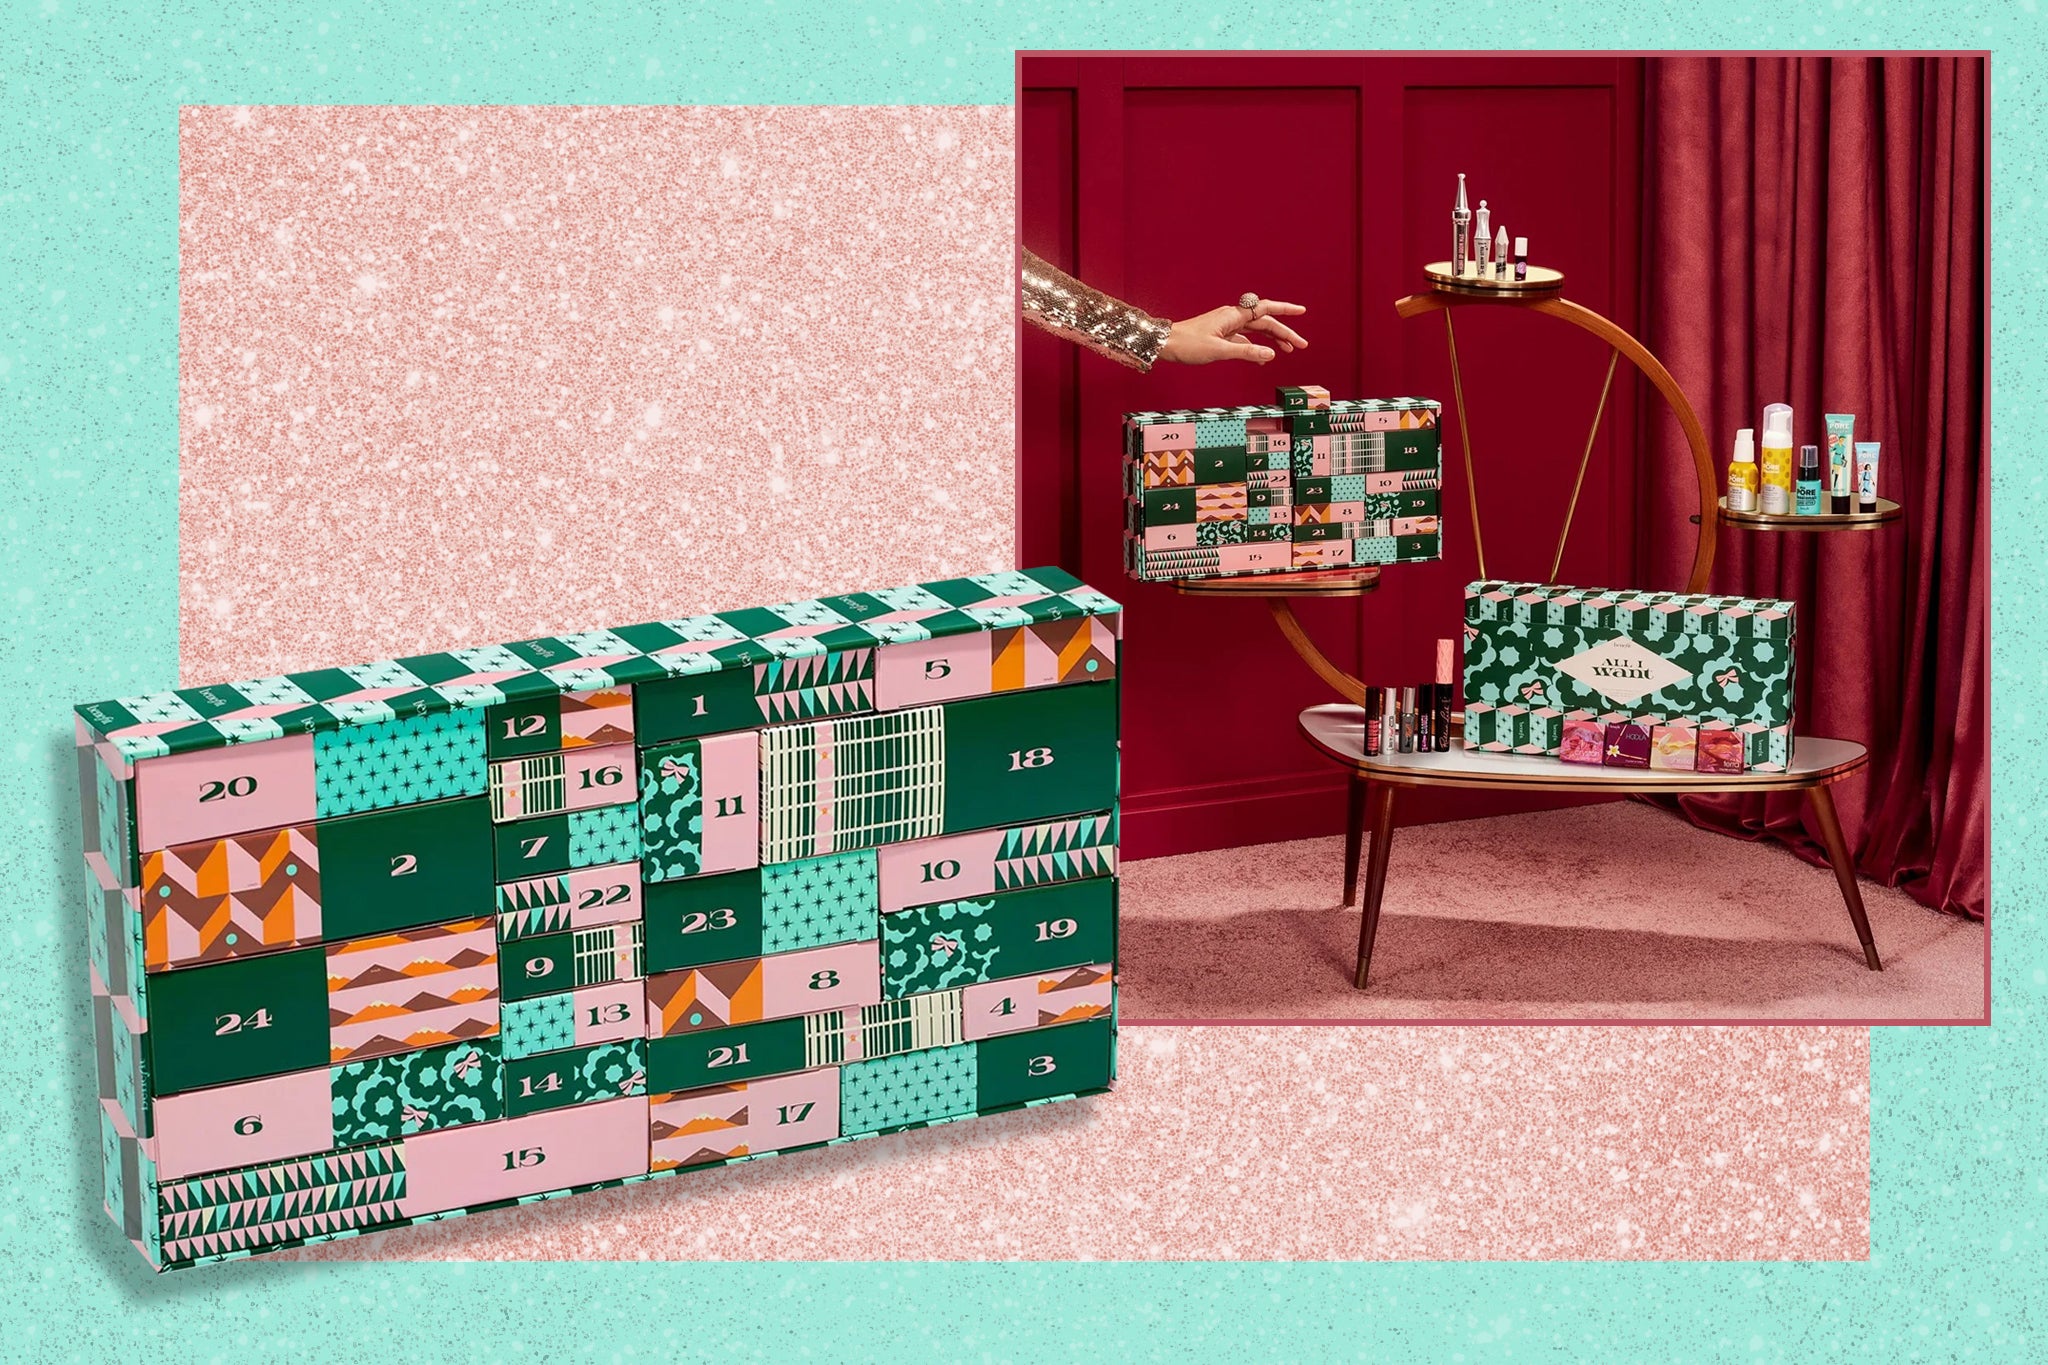 Benefit’s beauty advent calendar promises a glamorous Christmas countdown – but does it deliver?